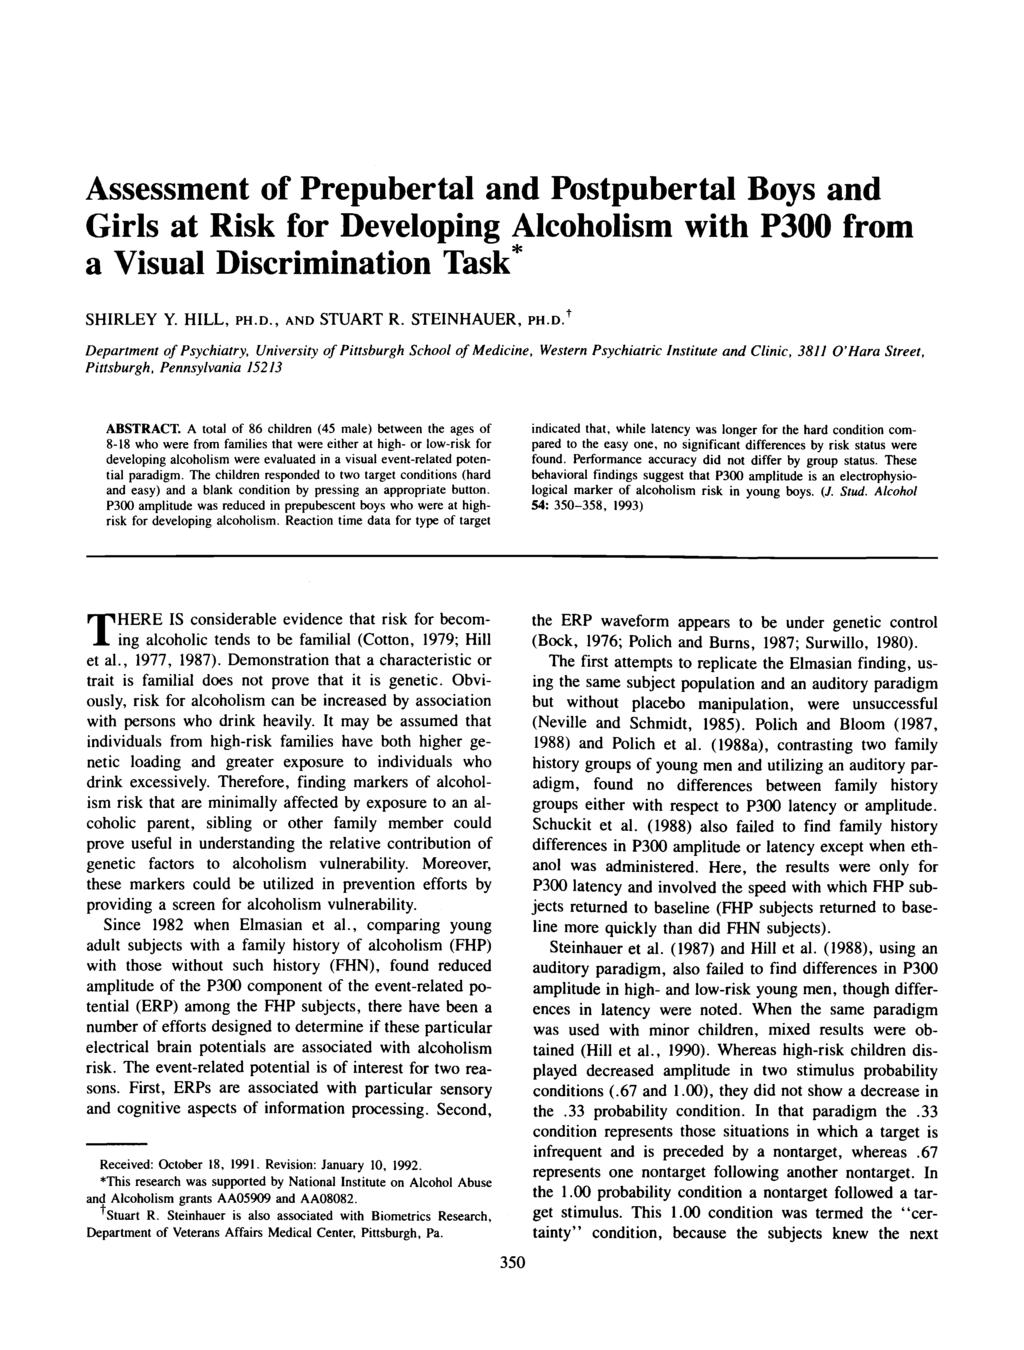 Assessment of Prepubertal and Postpubertal Boys and Girls at Risk for De